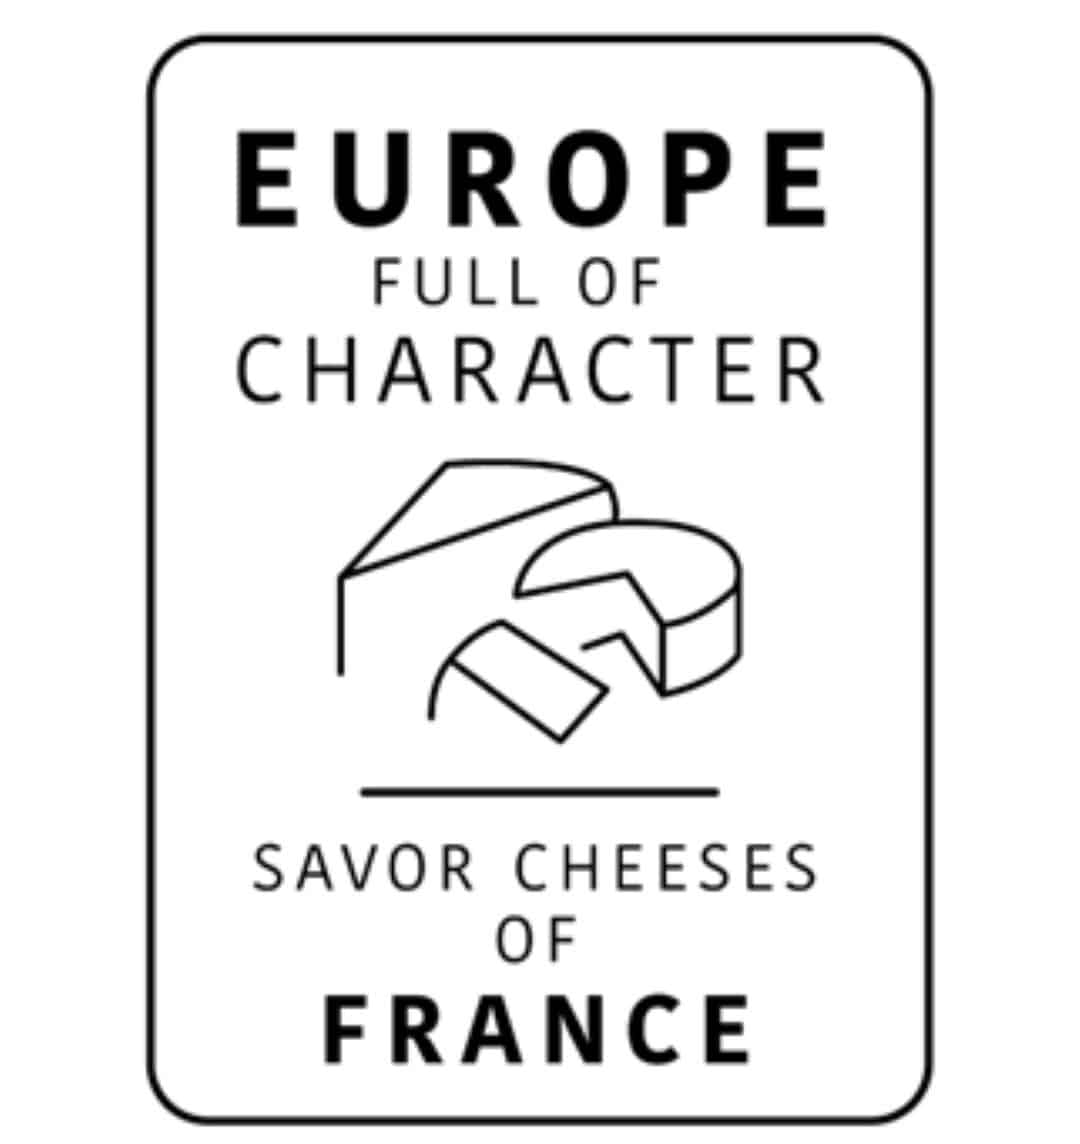 European Cheese 'Full Of Character' Campaign Grows Stronger, Enters Its Second Year